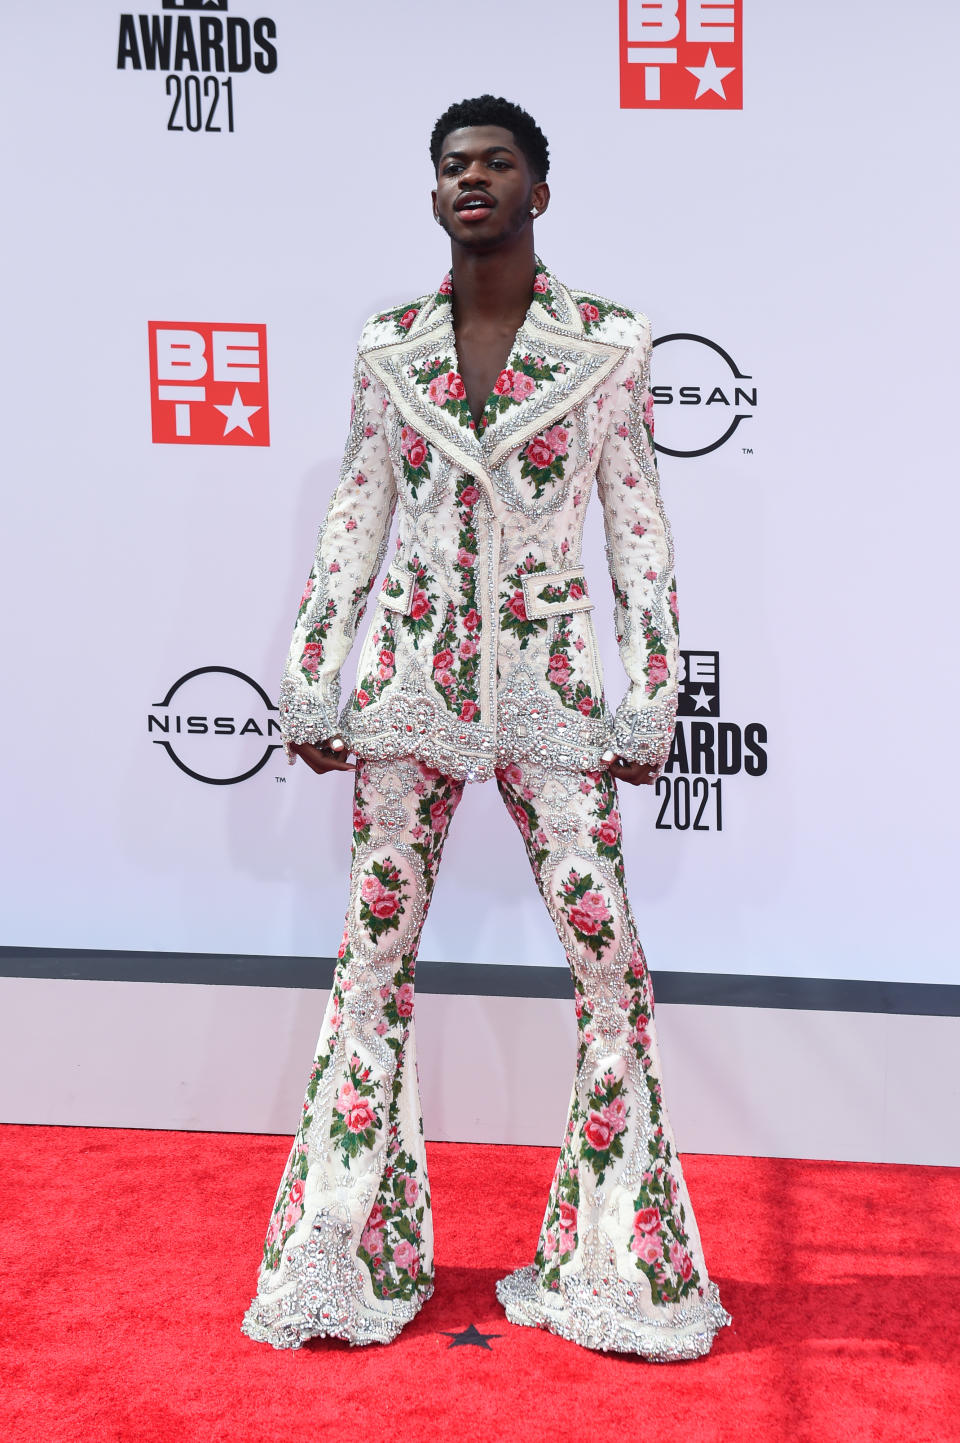 Lil Nas X attends the 2021 BET Awards. (Photo: Aaron J. Thornton/Getty Images)